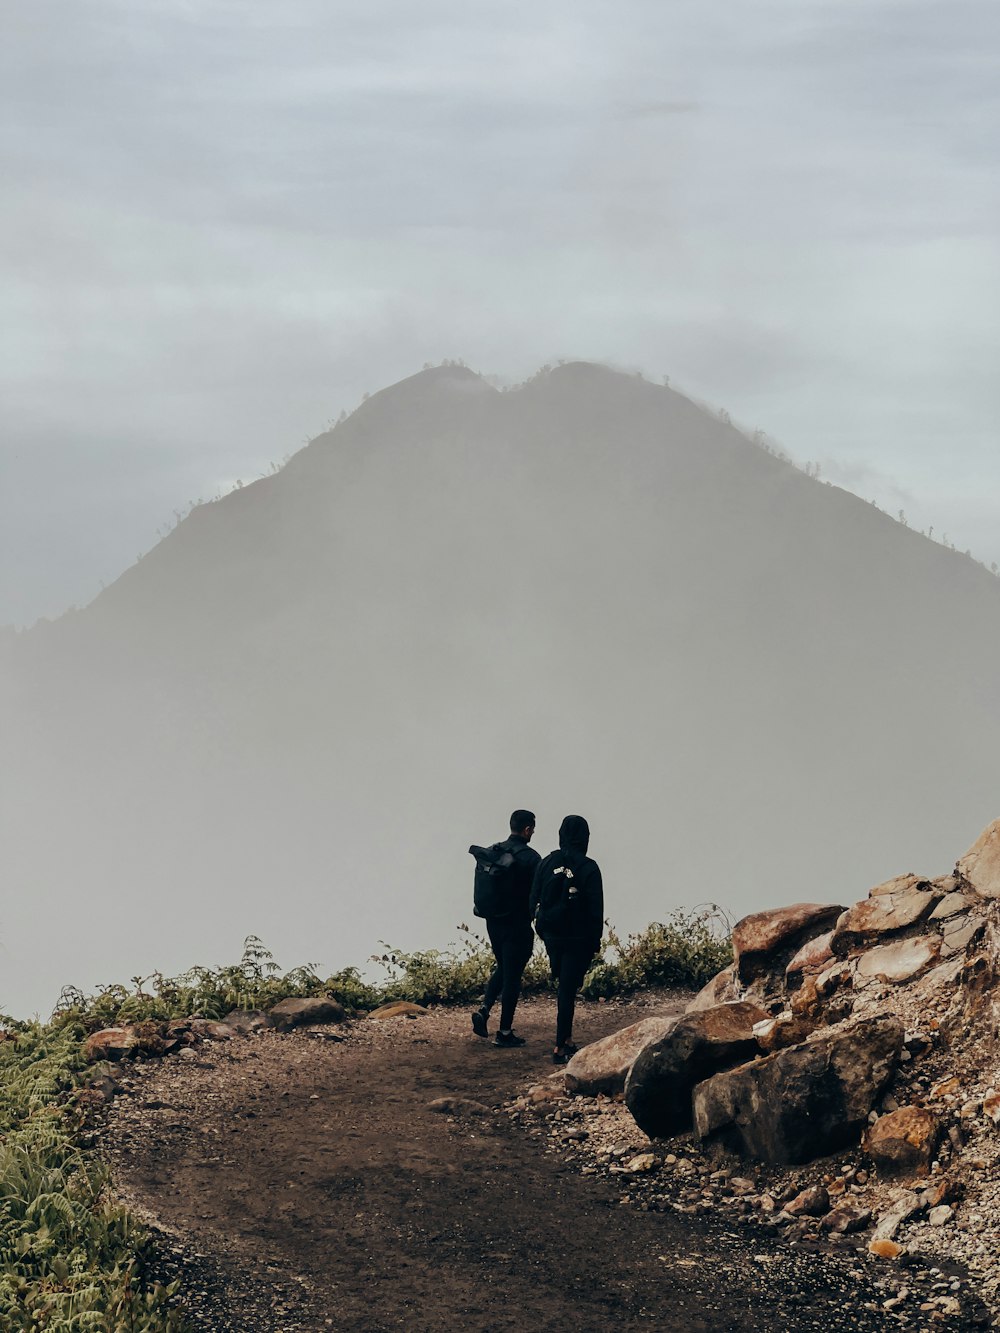 two people standing on a dirt path with a mountain in the background